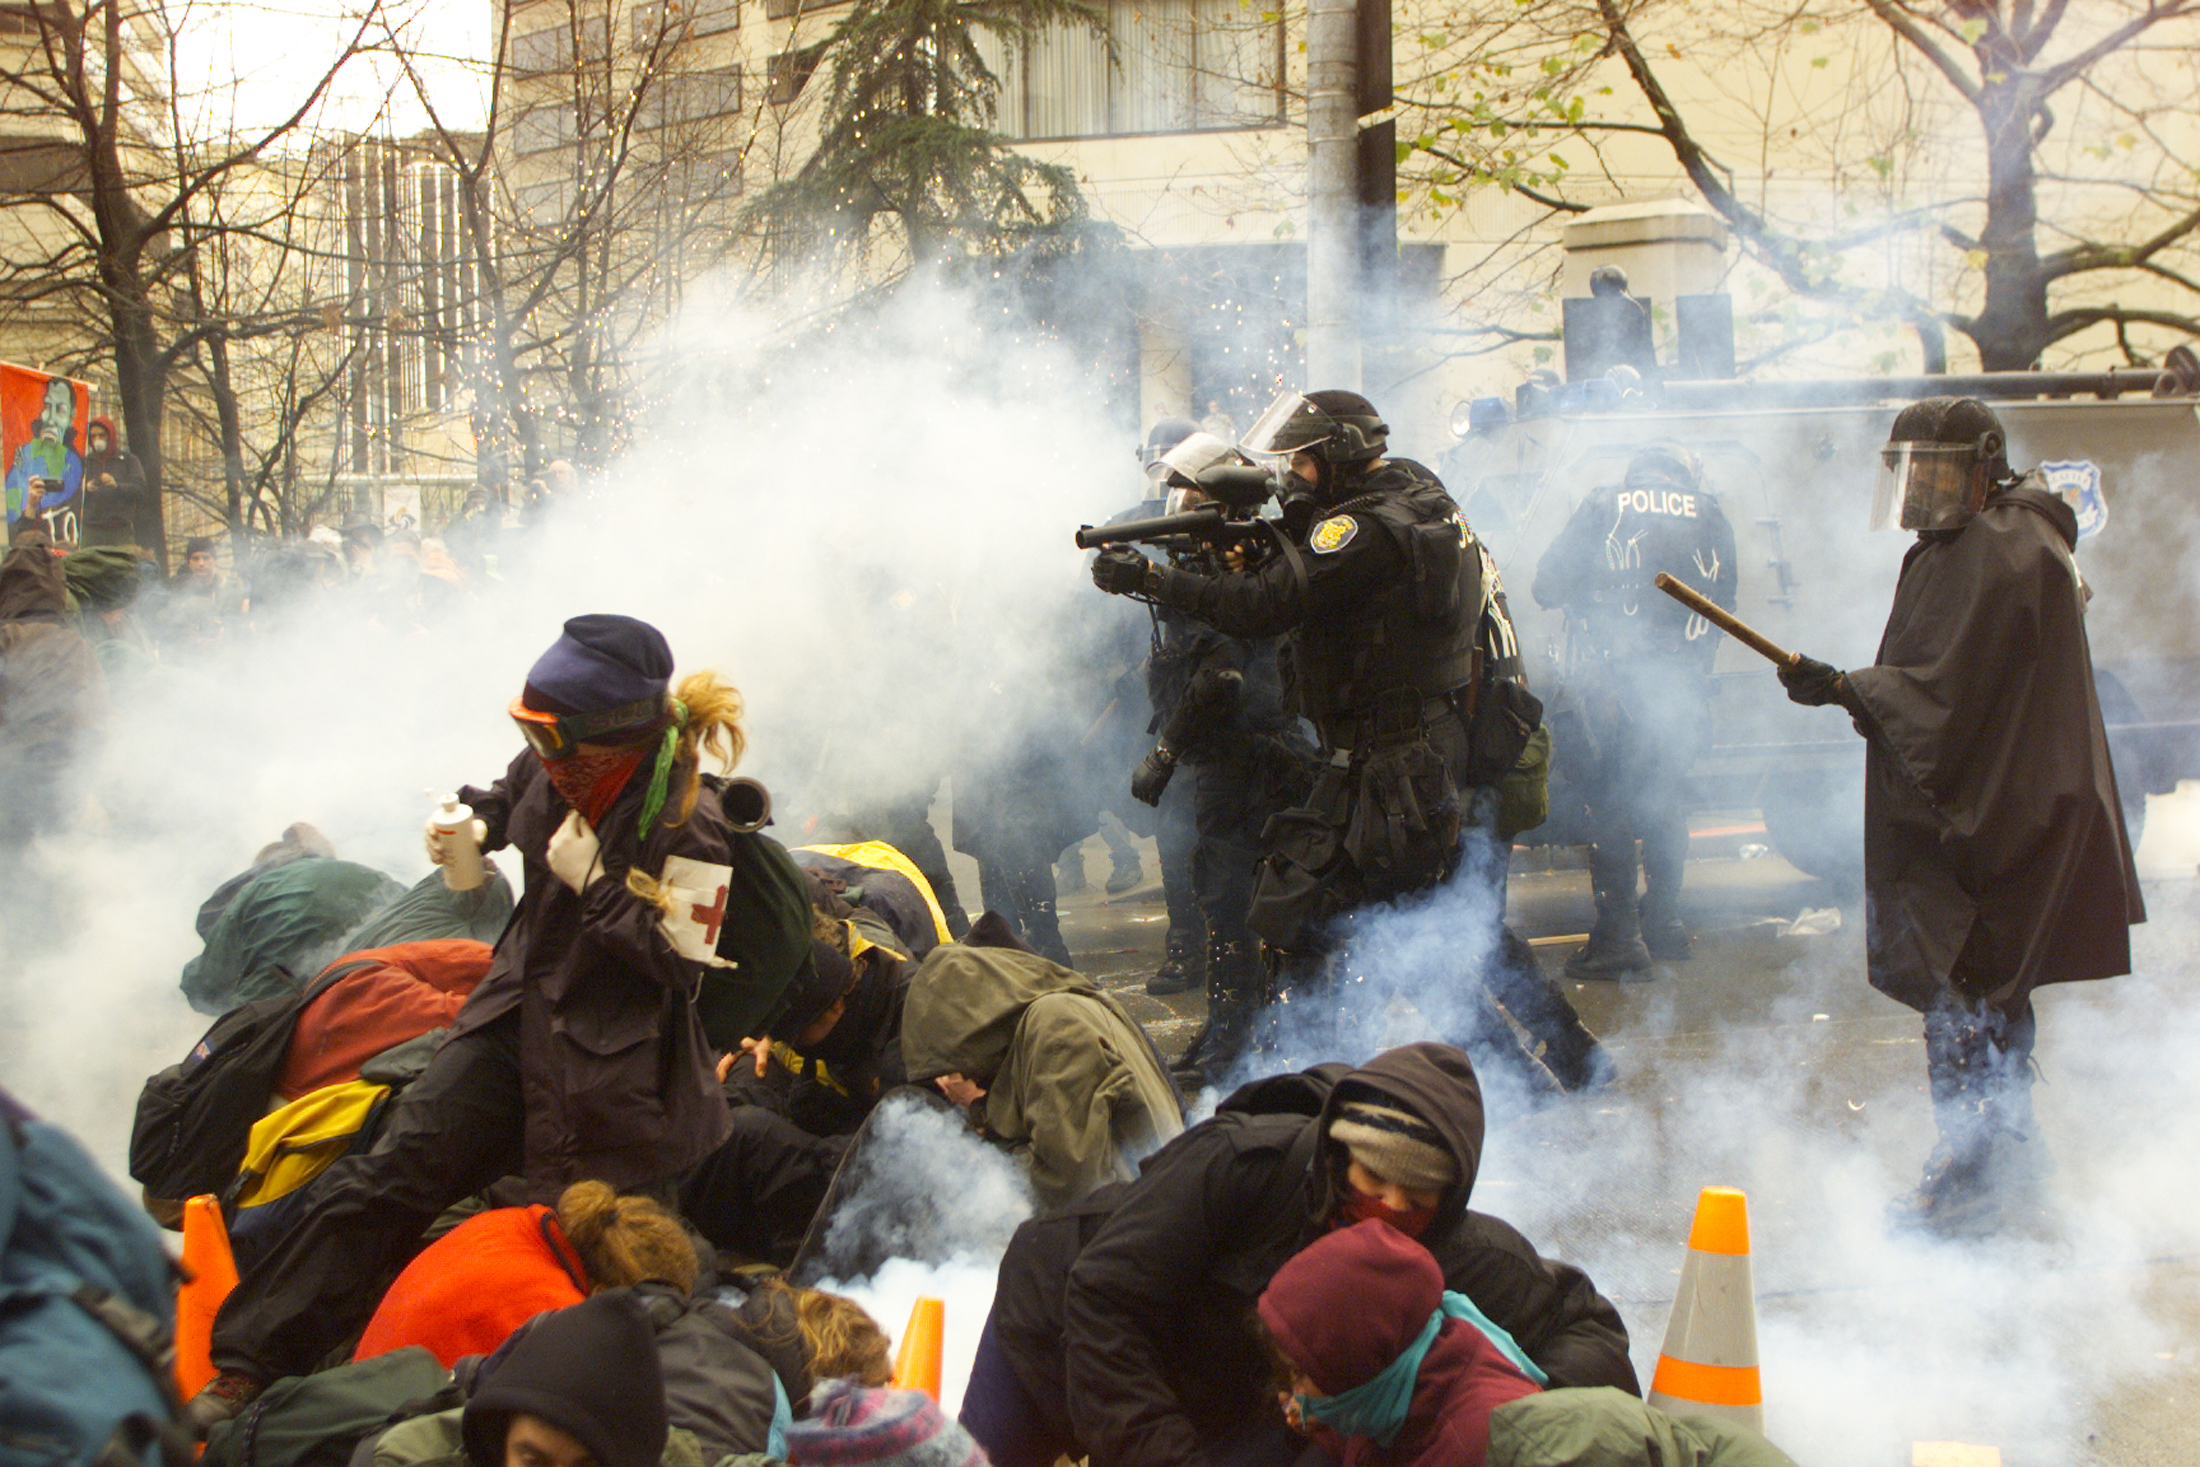 Seattle police fire teargas and pellets at protesters outside the World Trade Organization conference in Seattle, Washington on November 30, 1999.